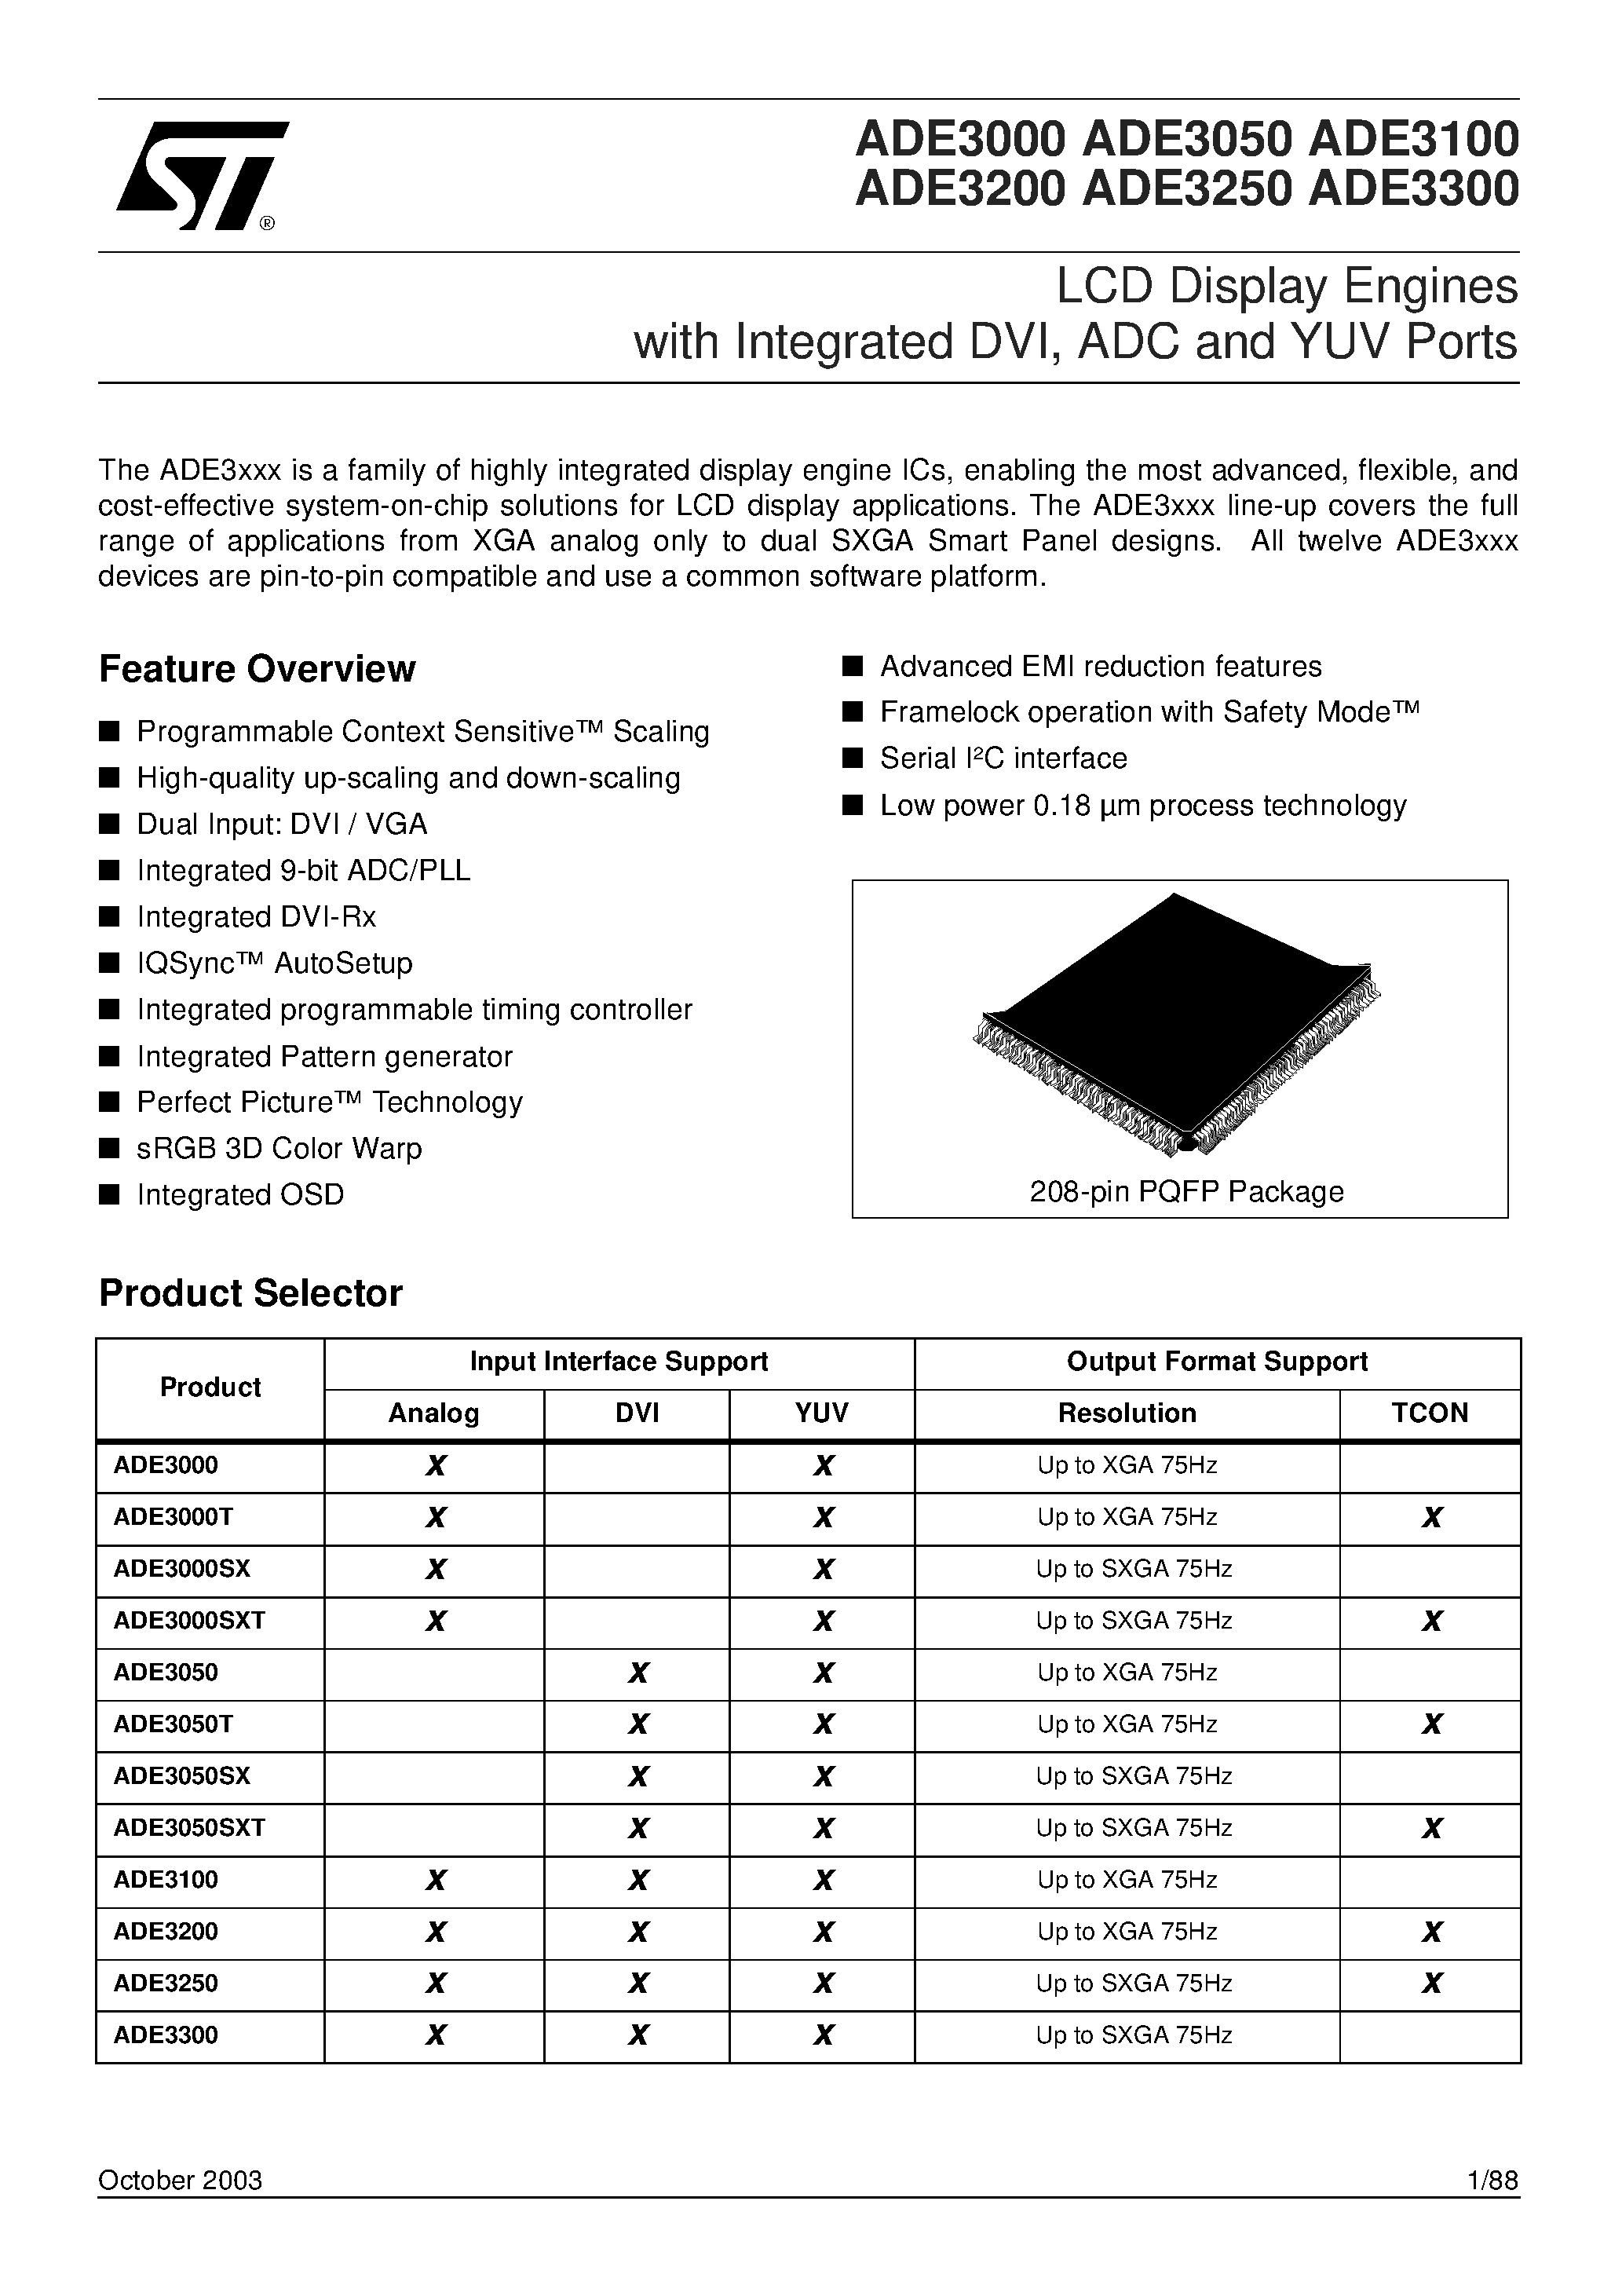 Datasheet ADE3200 - LCD Display Engines with Integrated DVI/ ADC and YUV Ports page 1